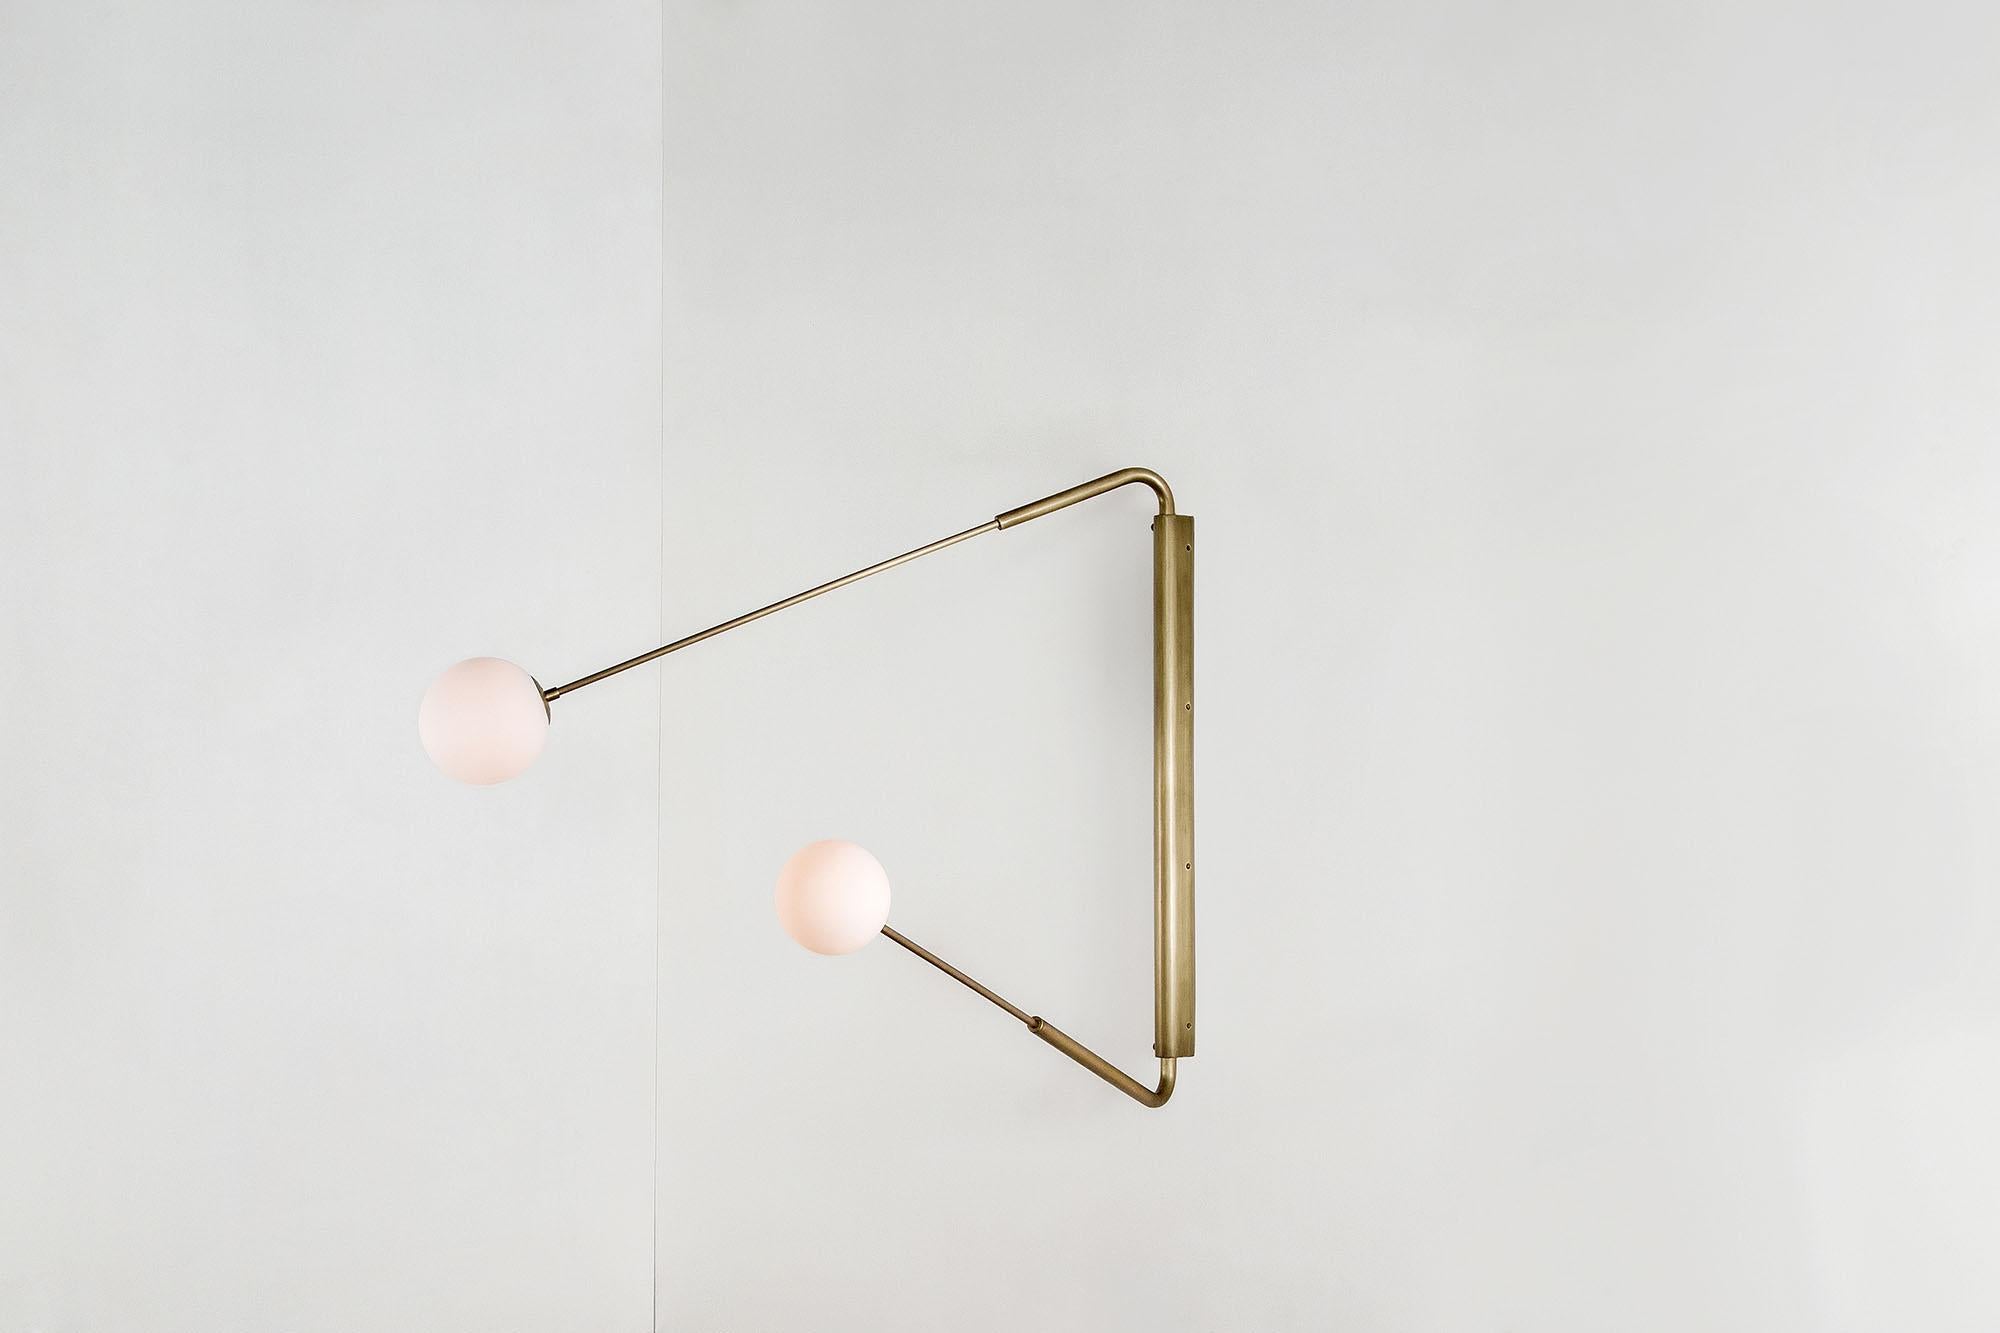 Contemporary Aged Brass Swing Arm Wall Sconce, Flutter Two by Paul Matter

The long rotating arms are attached to a vertical, wall-mounted spine that results in a Minimalist yet oversized fixture. Flutter comes in three variations, each with two